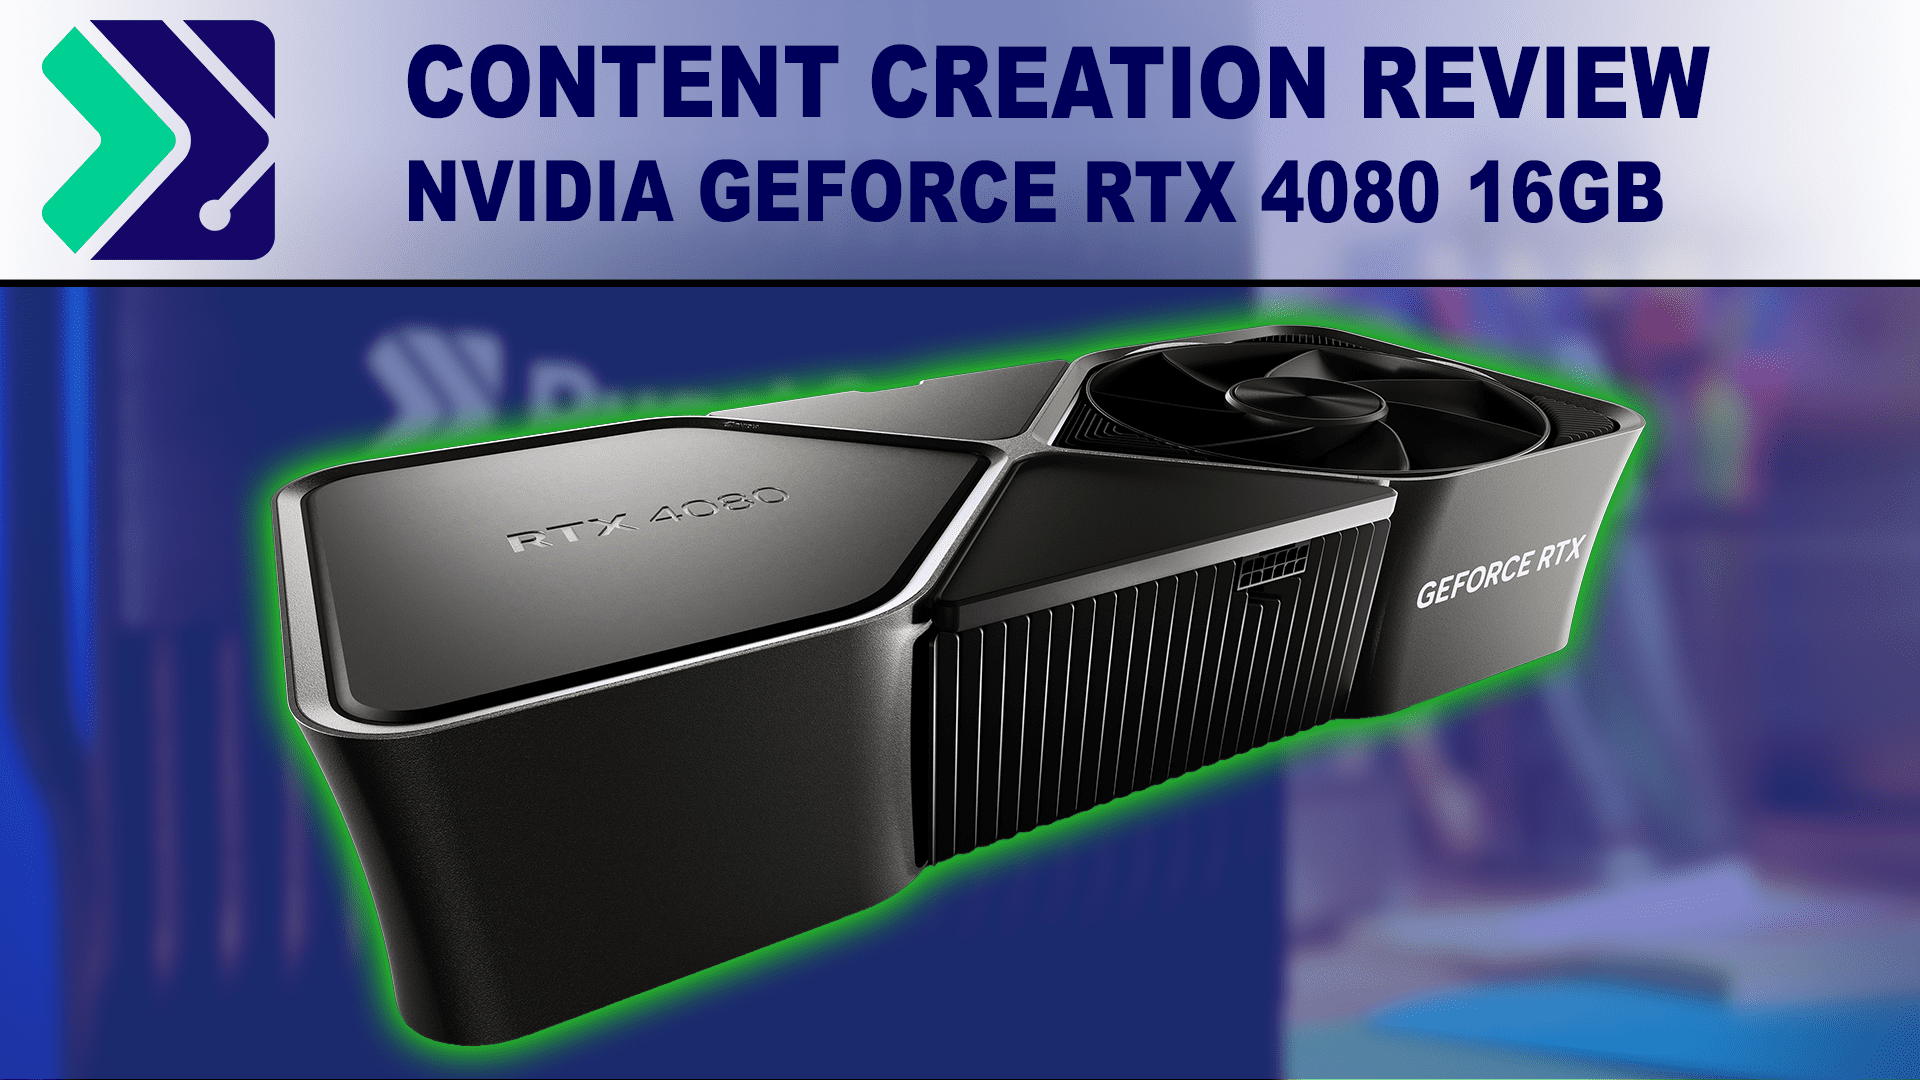 GeForce RTX 16GB Content Creation Review | Puget Systems